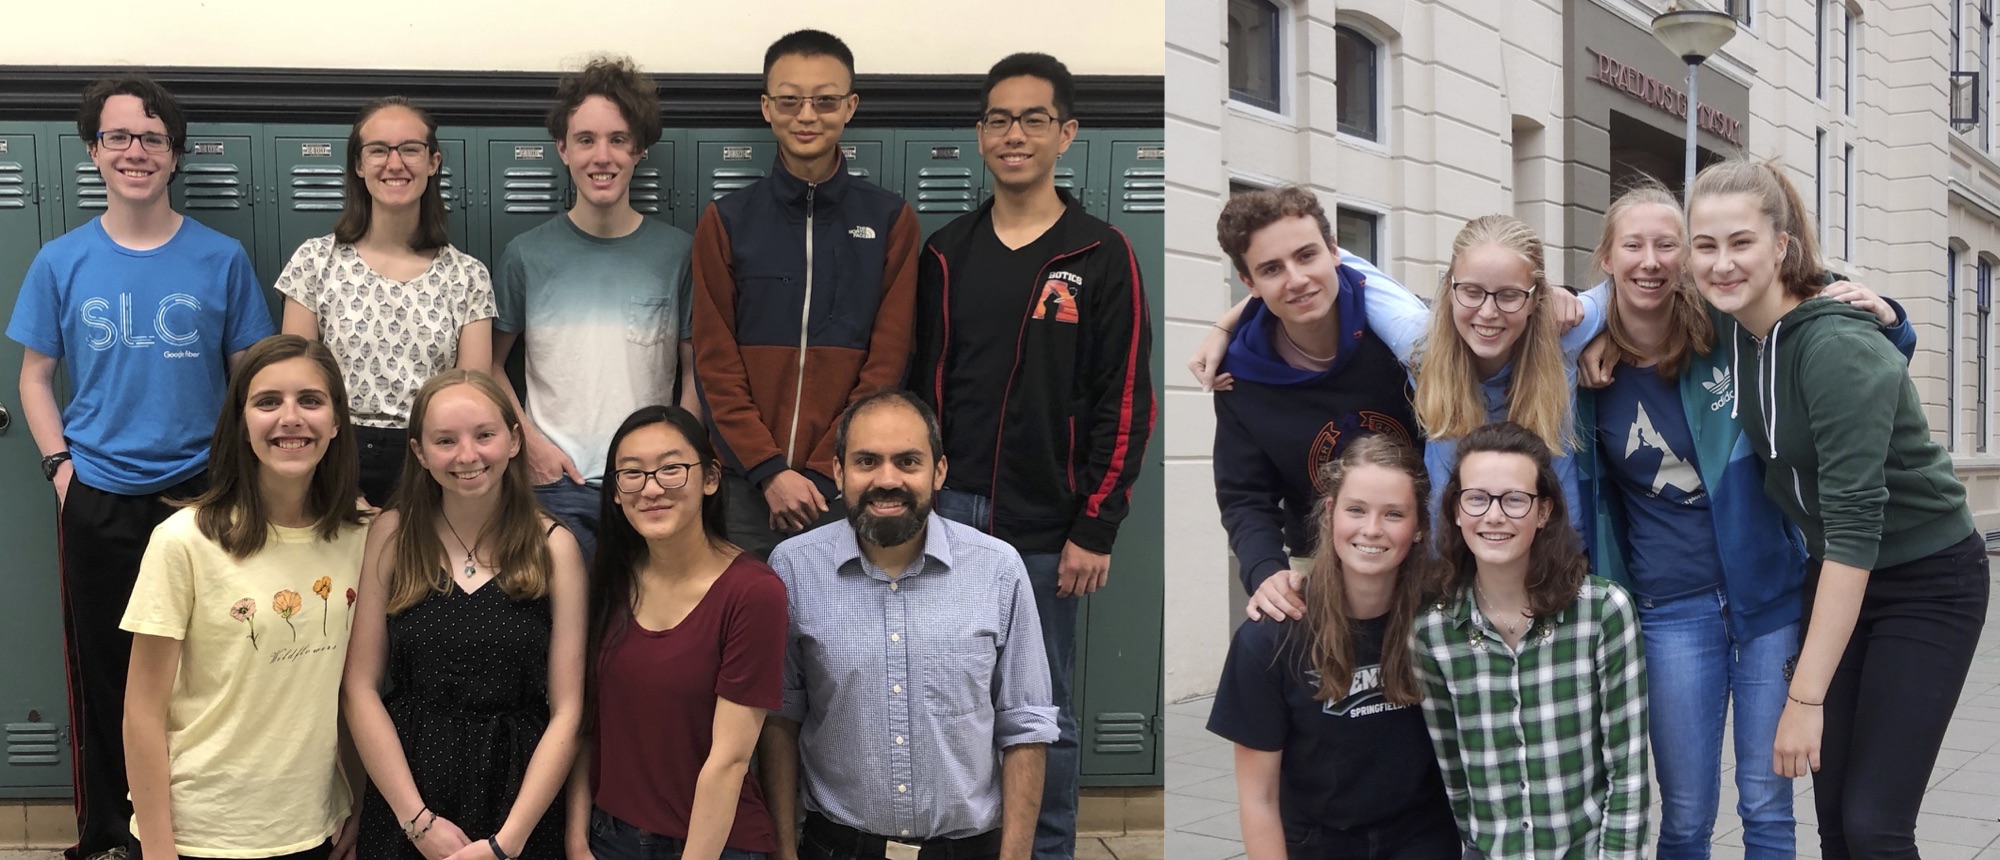 Photographs of the winners of the 2019 Beamline for Schools.